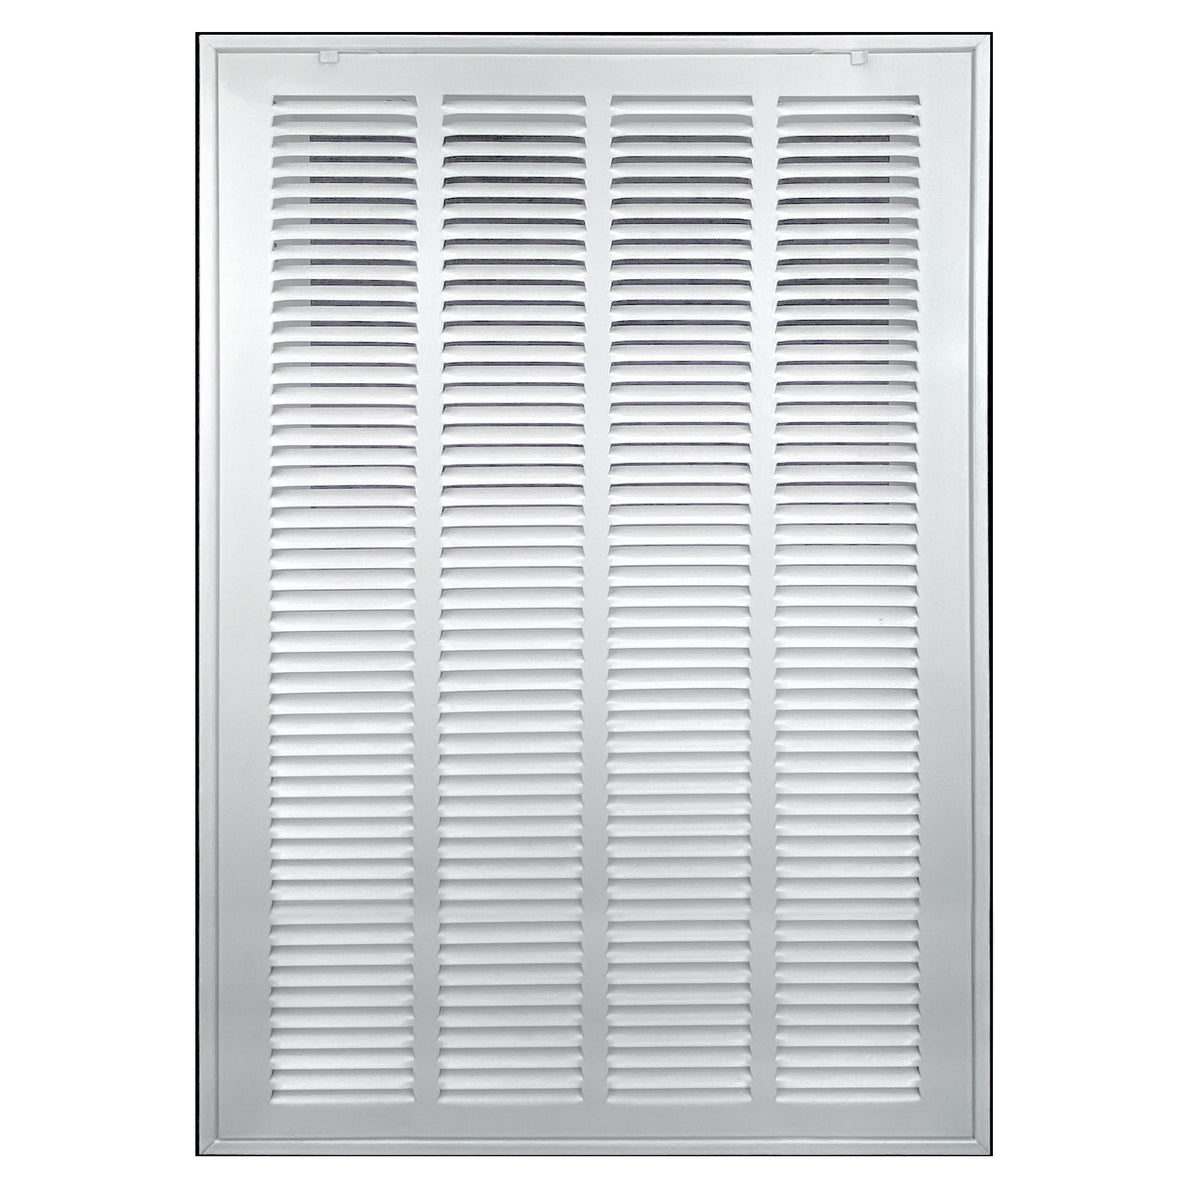 airgrilles 20" x 25" duct opening   hd steel return air filter grille for sidewall and ceiling  agc  7agc-1raf-wh-20x25 756014649444 - 1